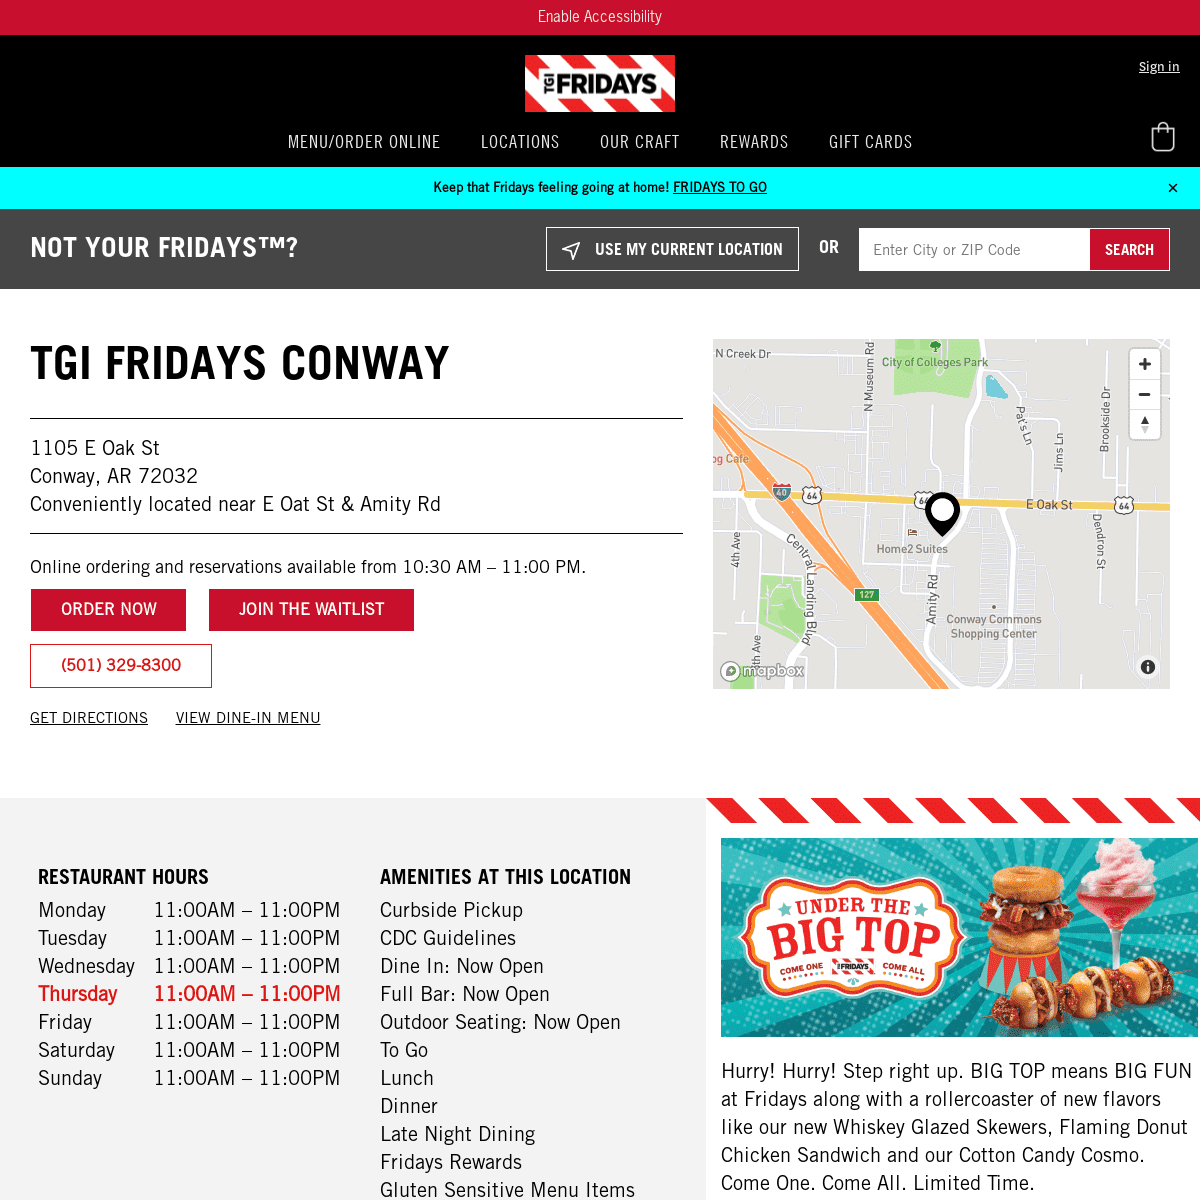 A complete backup of https://locations.tgifridays.com/ar/conway/1105-e-oak-st.html